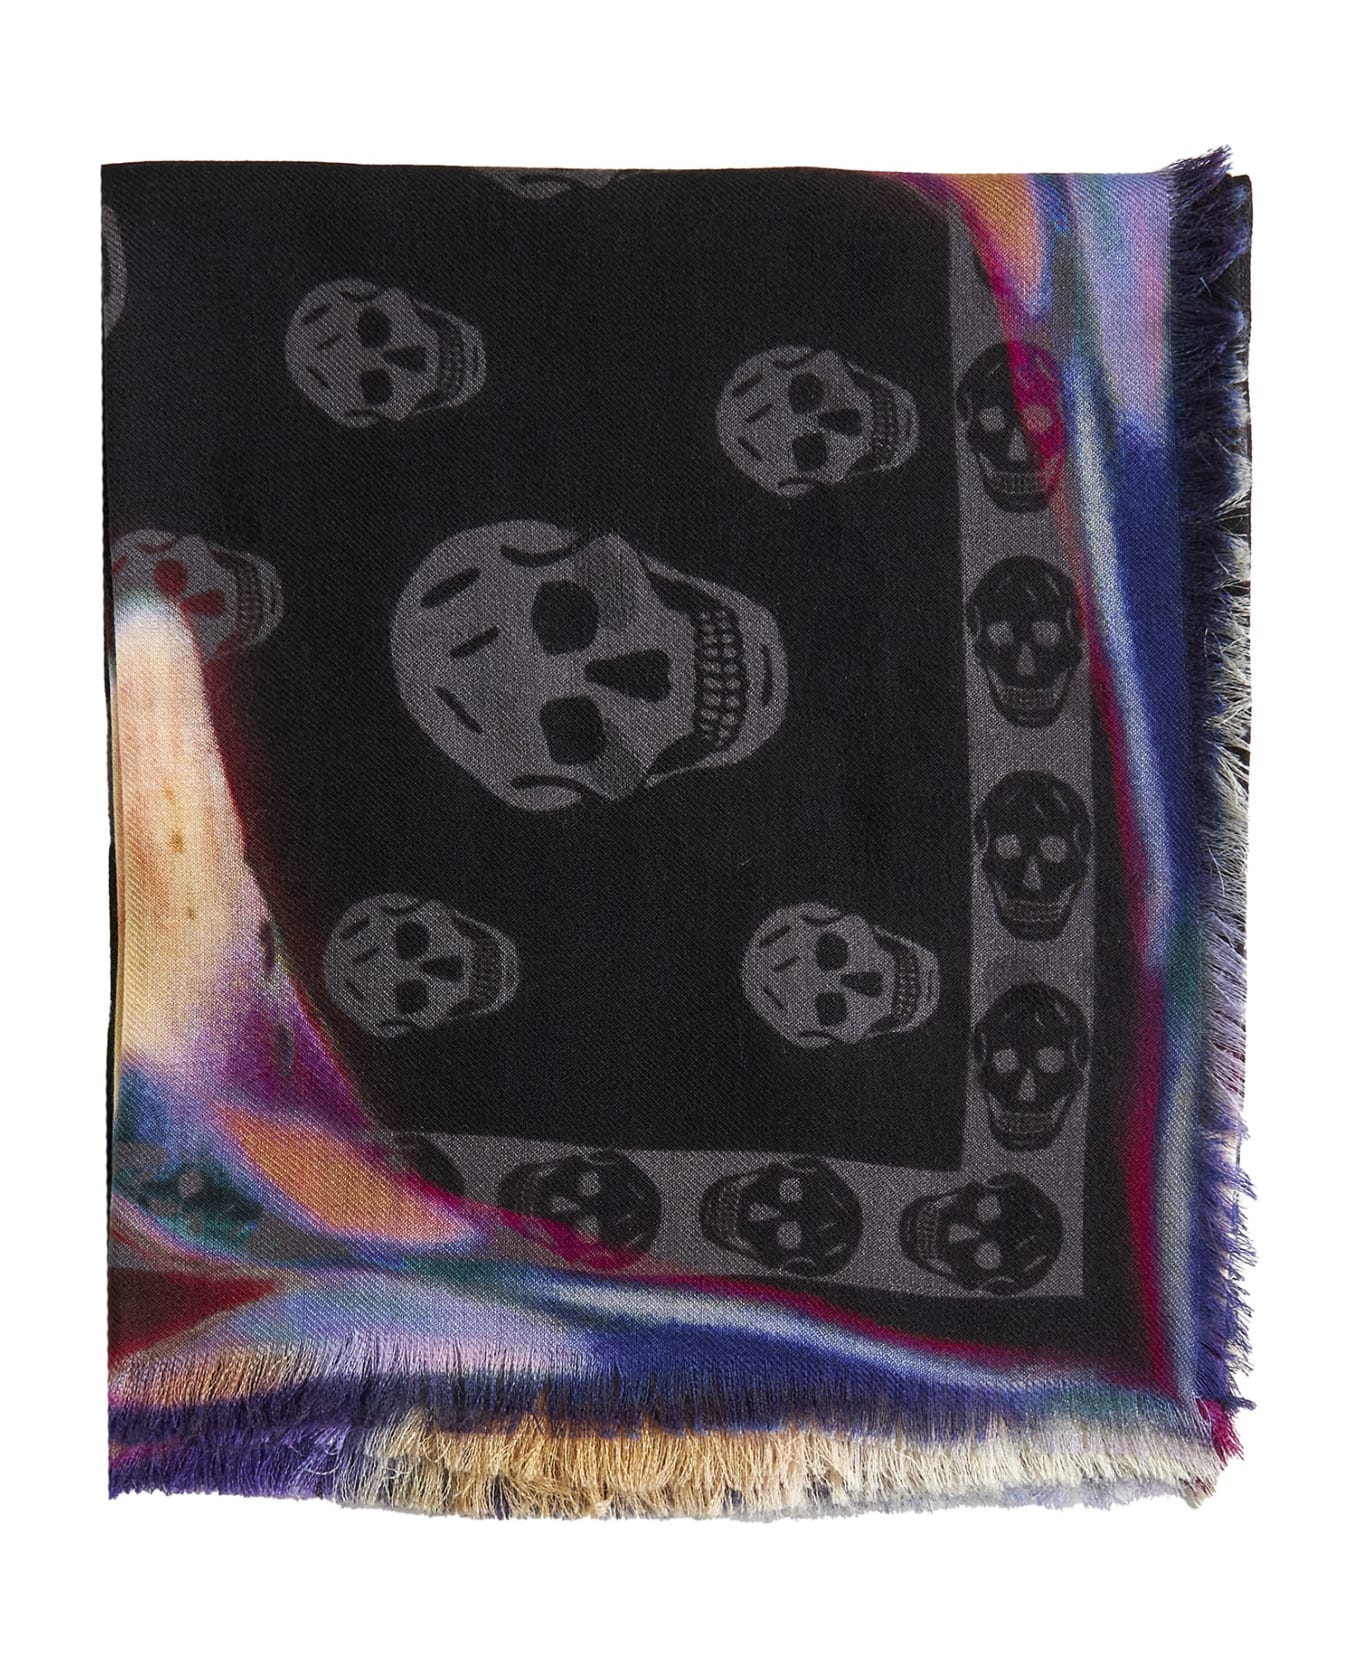 Alexander McQueen Skull And Floral Print Wool Scarf - Black ivory